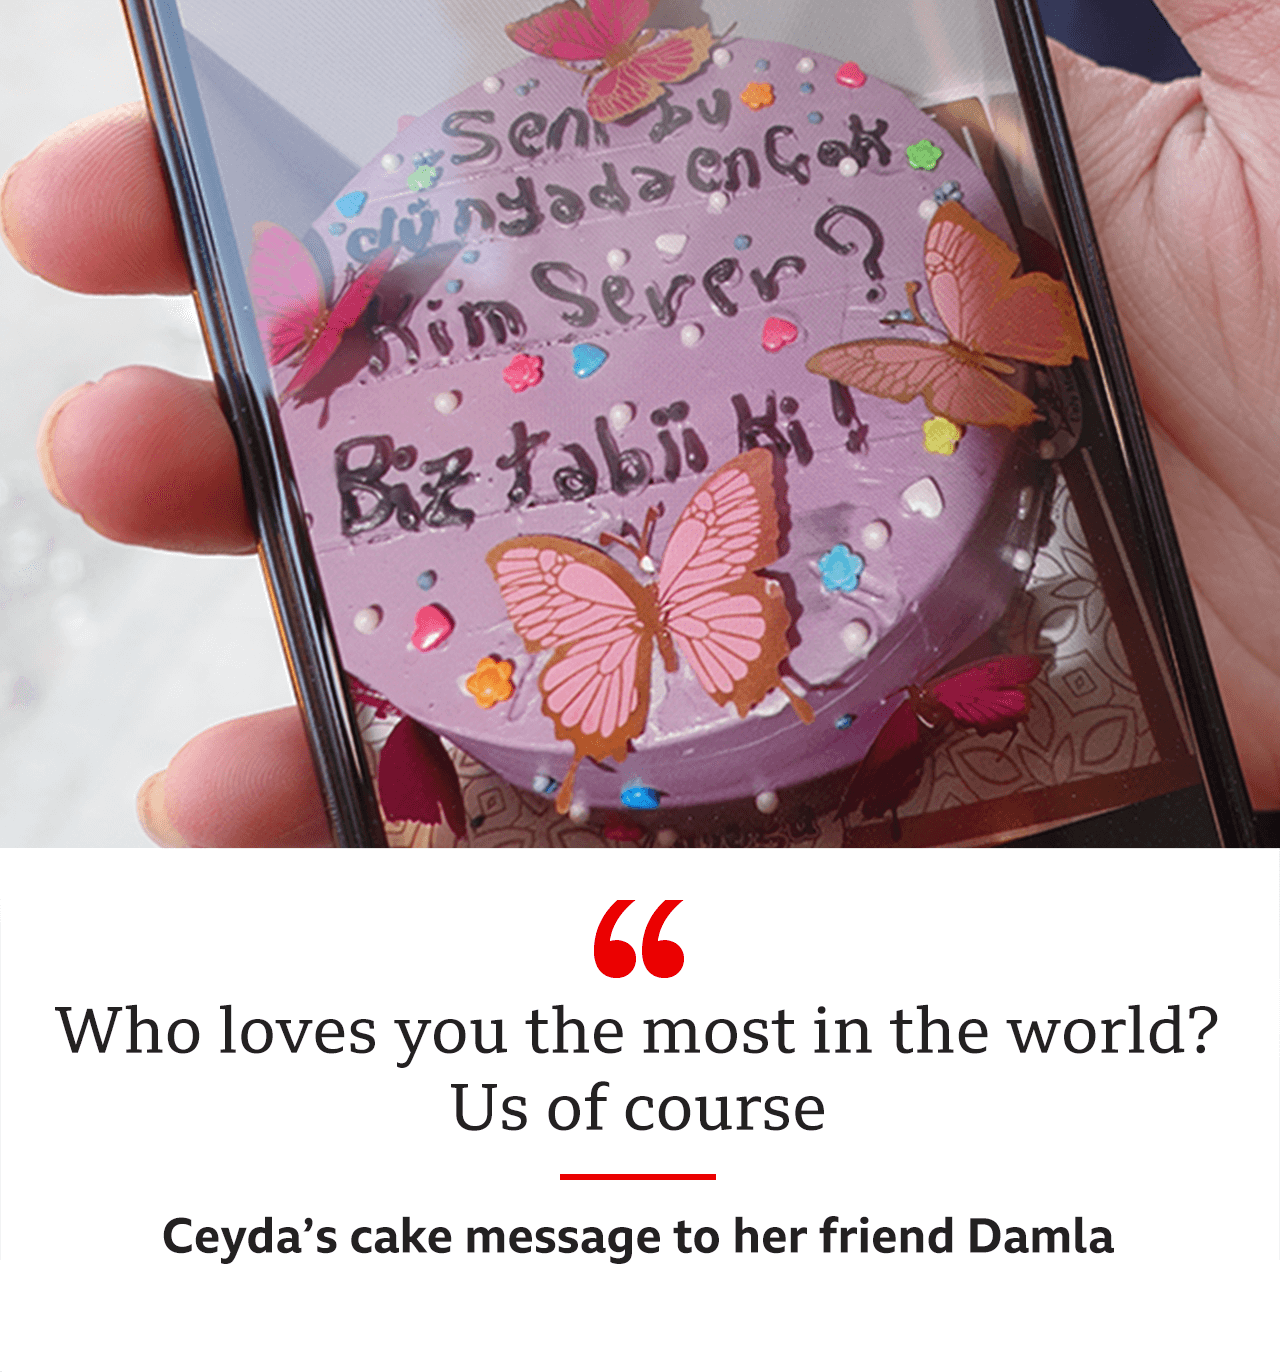 Quote and photo showing message on a cake from missing Ceyda to her friend Damla which reads: Who loves you the most? Us of course